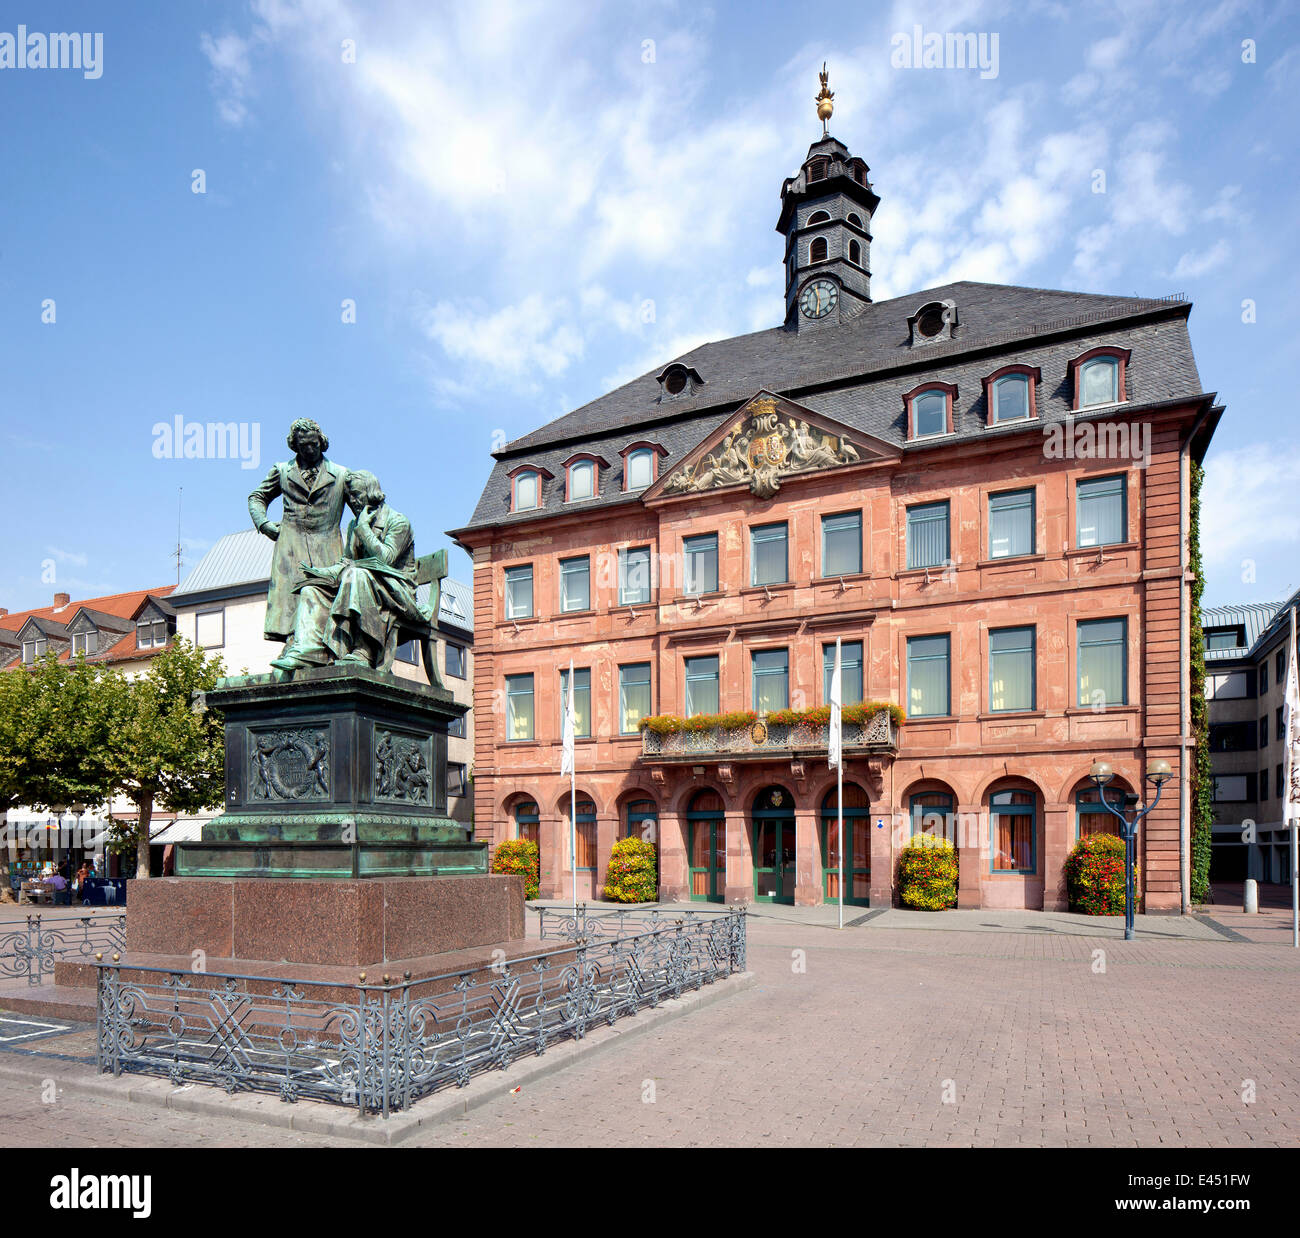 List 101+ Images brothers grimm memorial is located in which german city Sharp